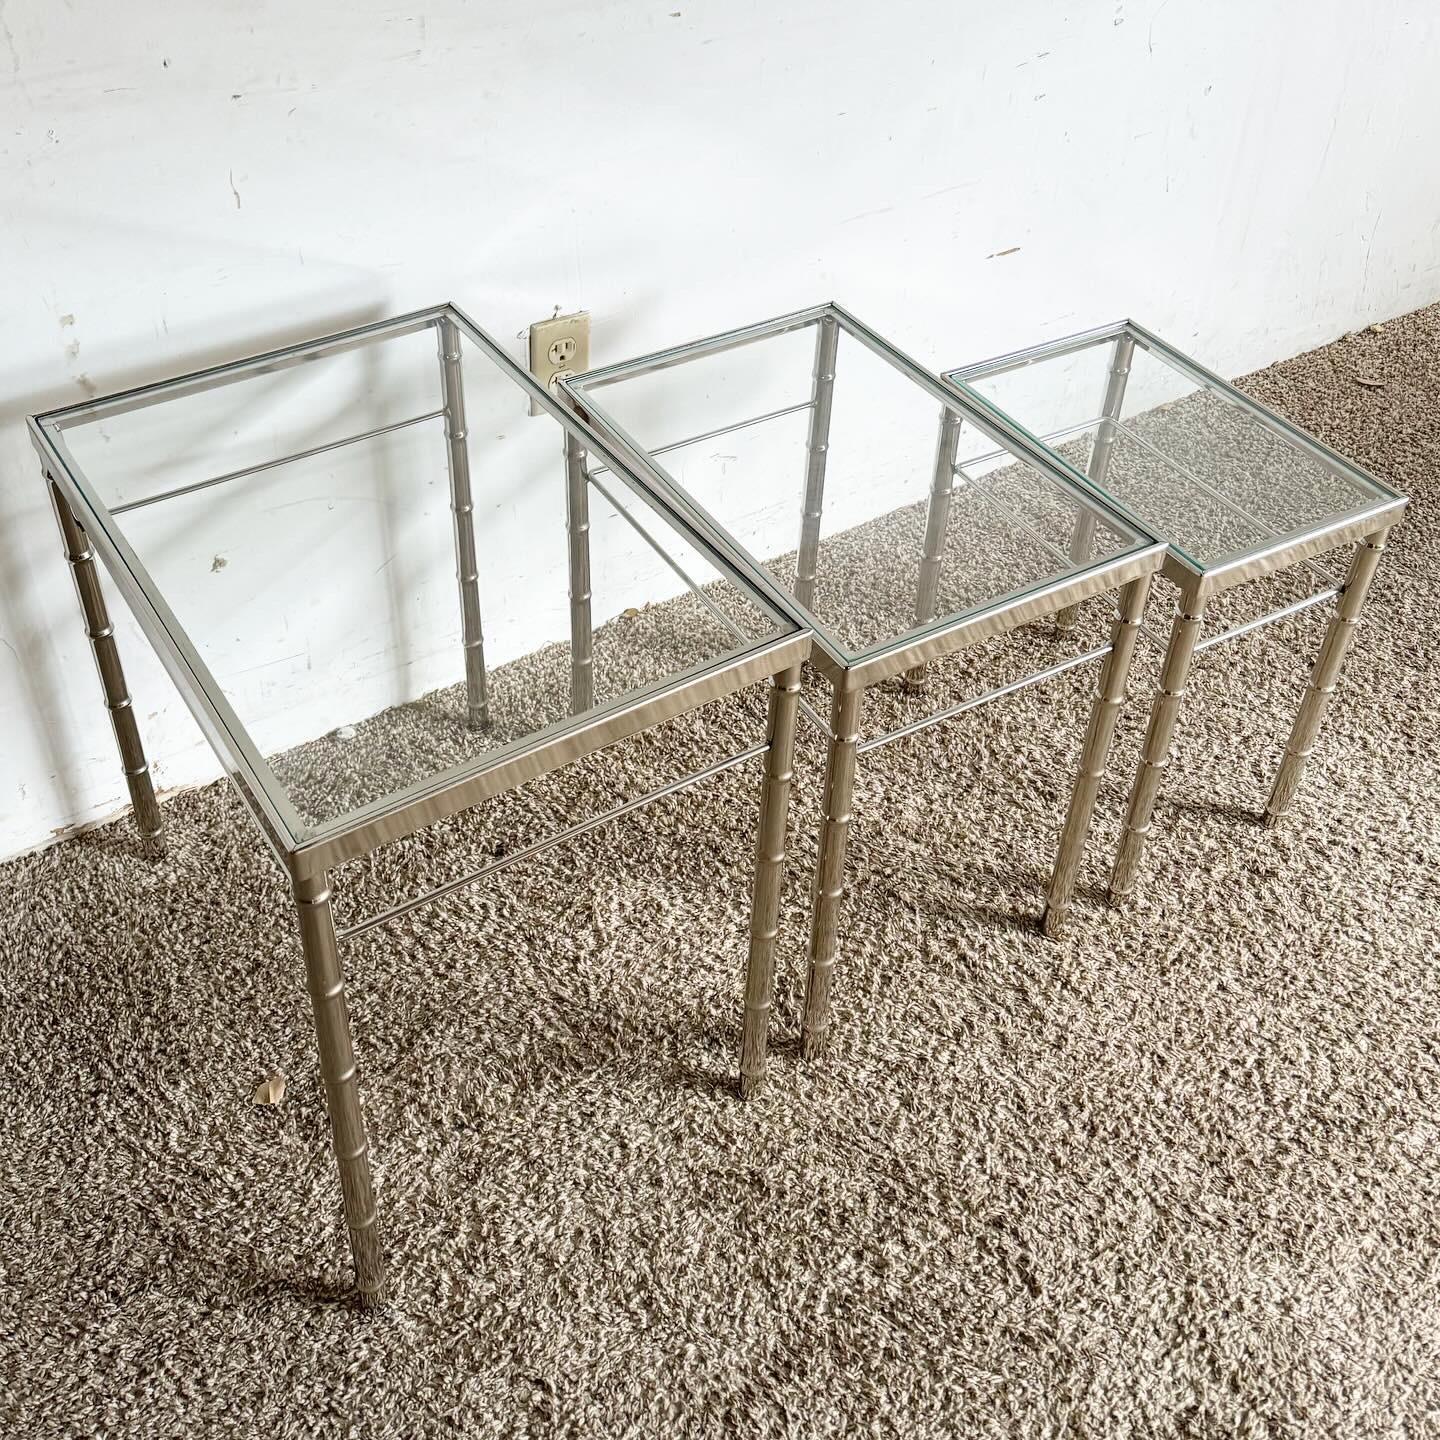 Discover the versatility and style of the Mid Century Modern Chrome Faux Bamboo Glass Top Nesting Tables, a set of three. Featuring chrome frames with a bamboo-like design and clear glass tops, these tables offer a blend of mid-century charm and